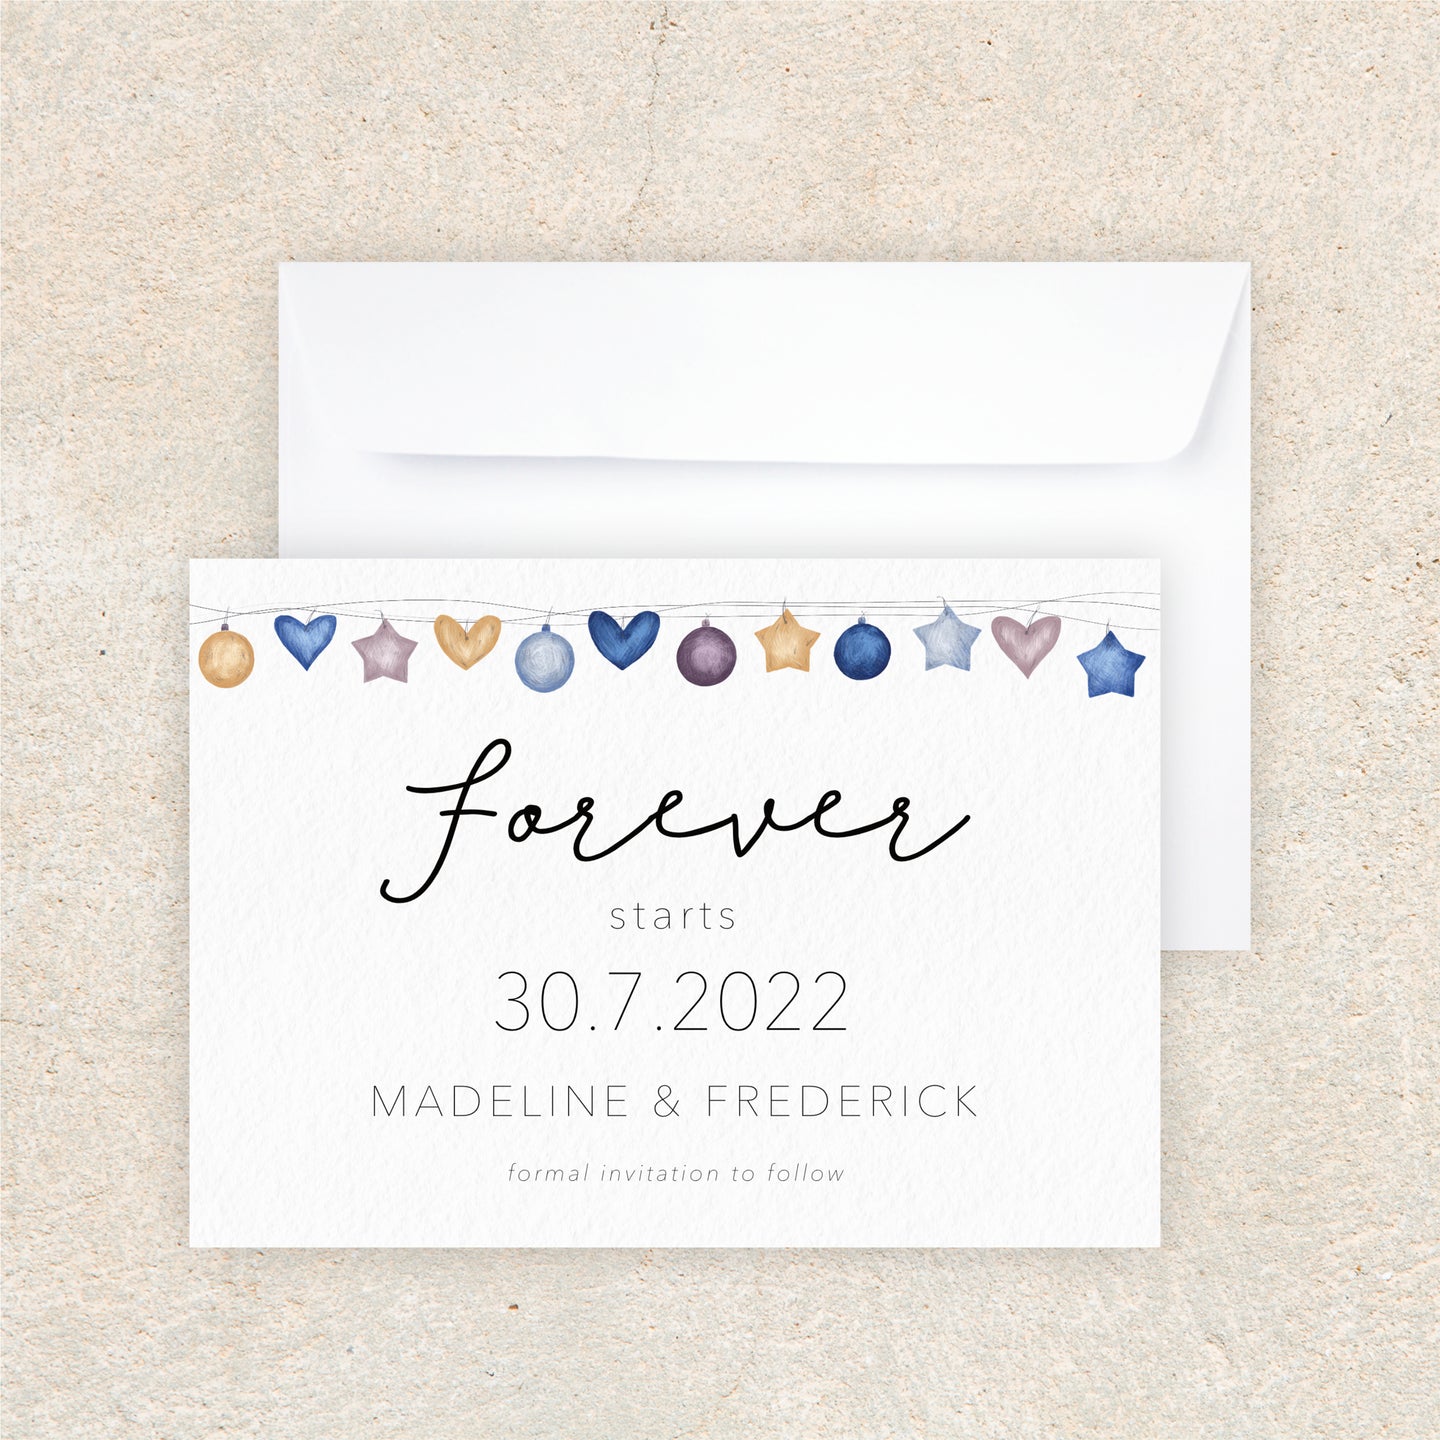 Madeline Save The Date Card